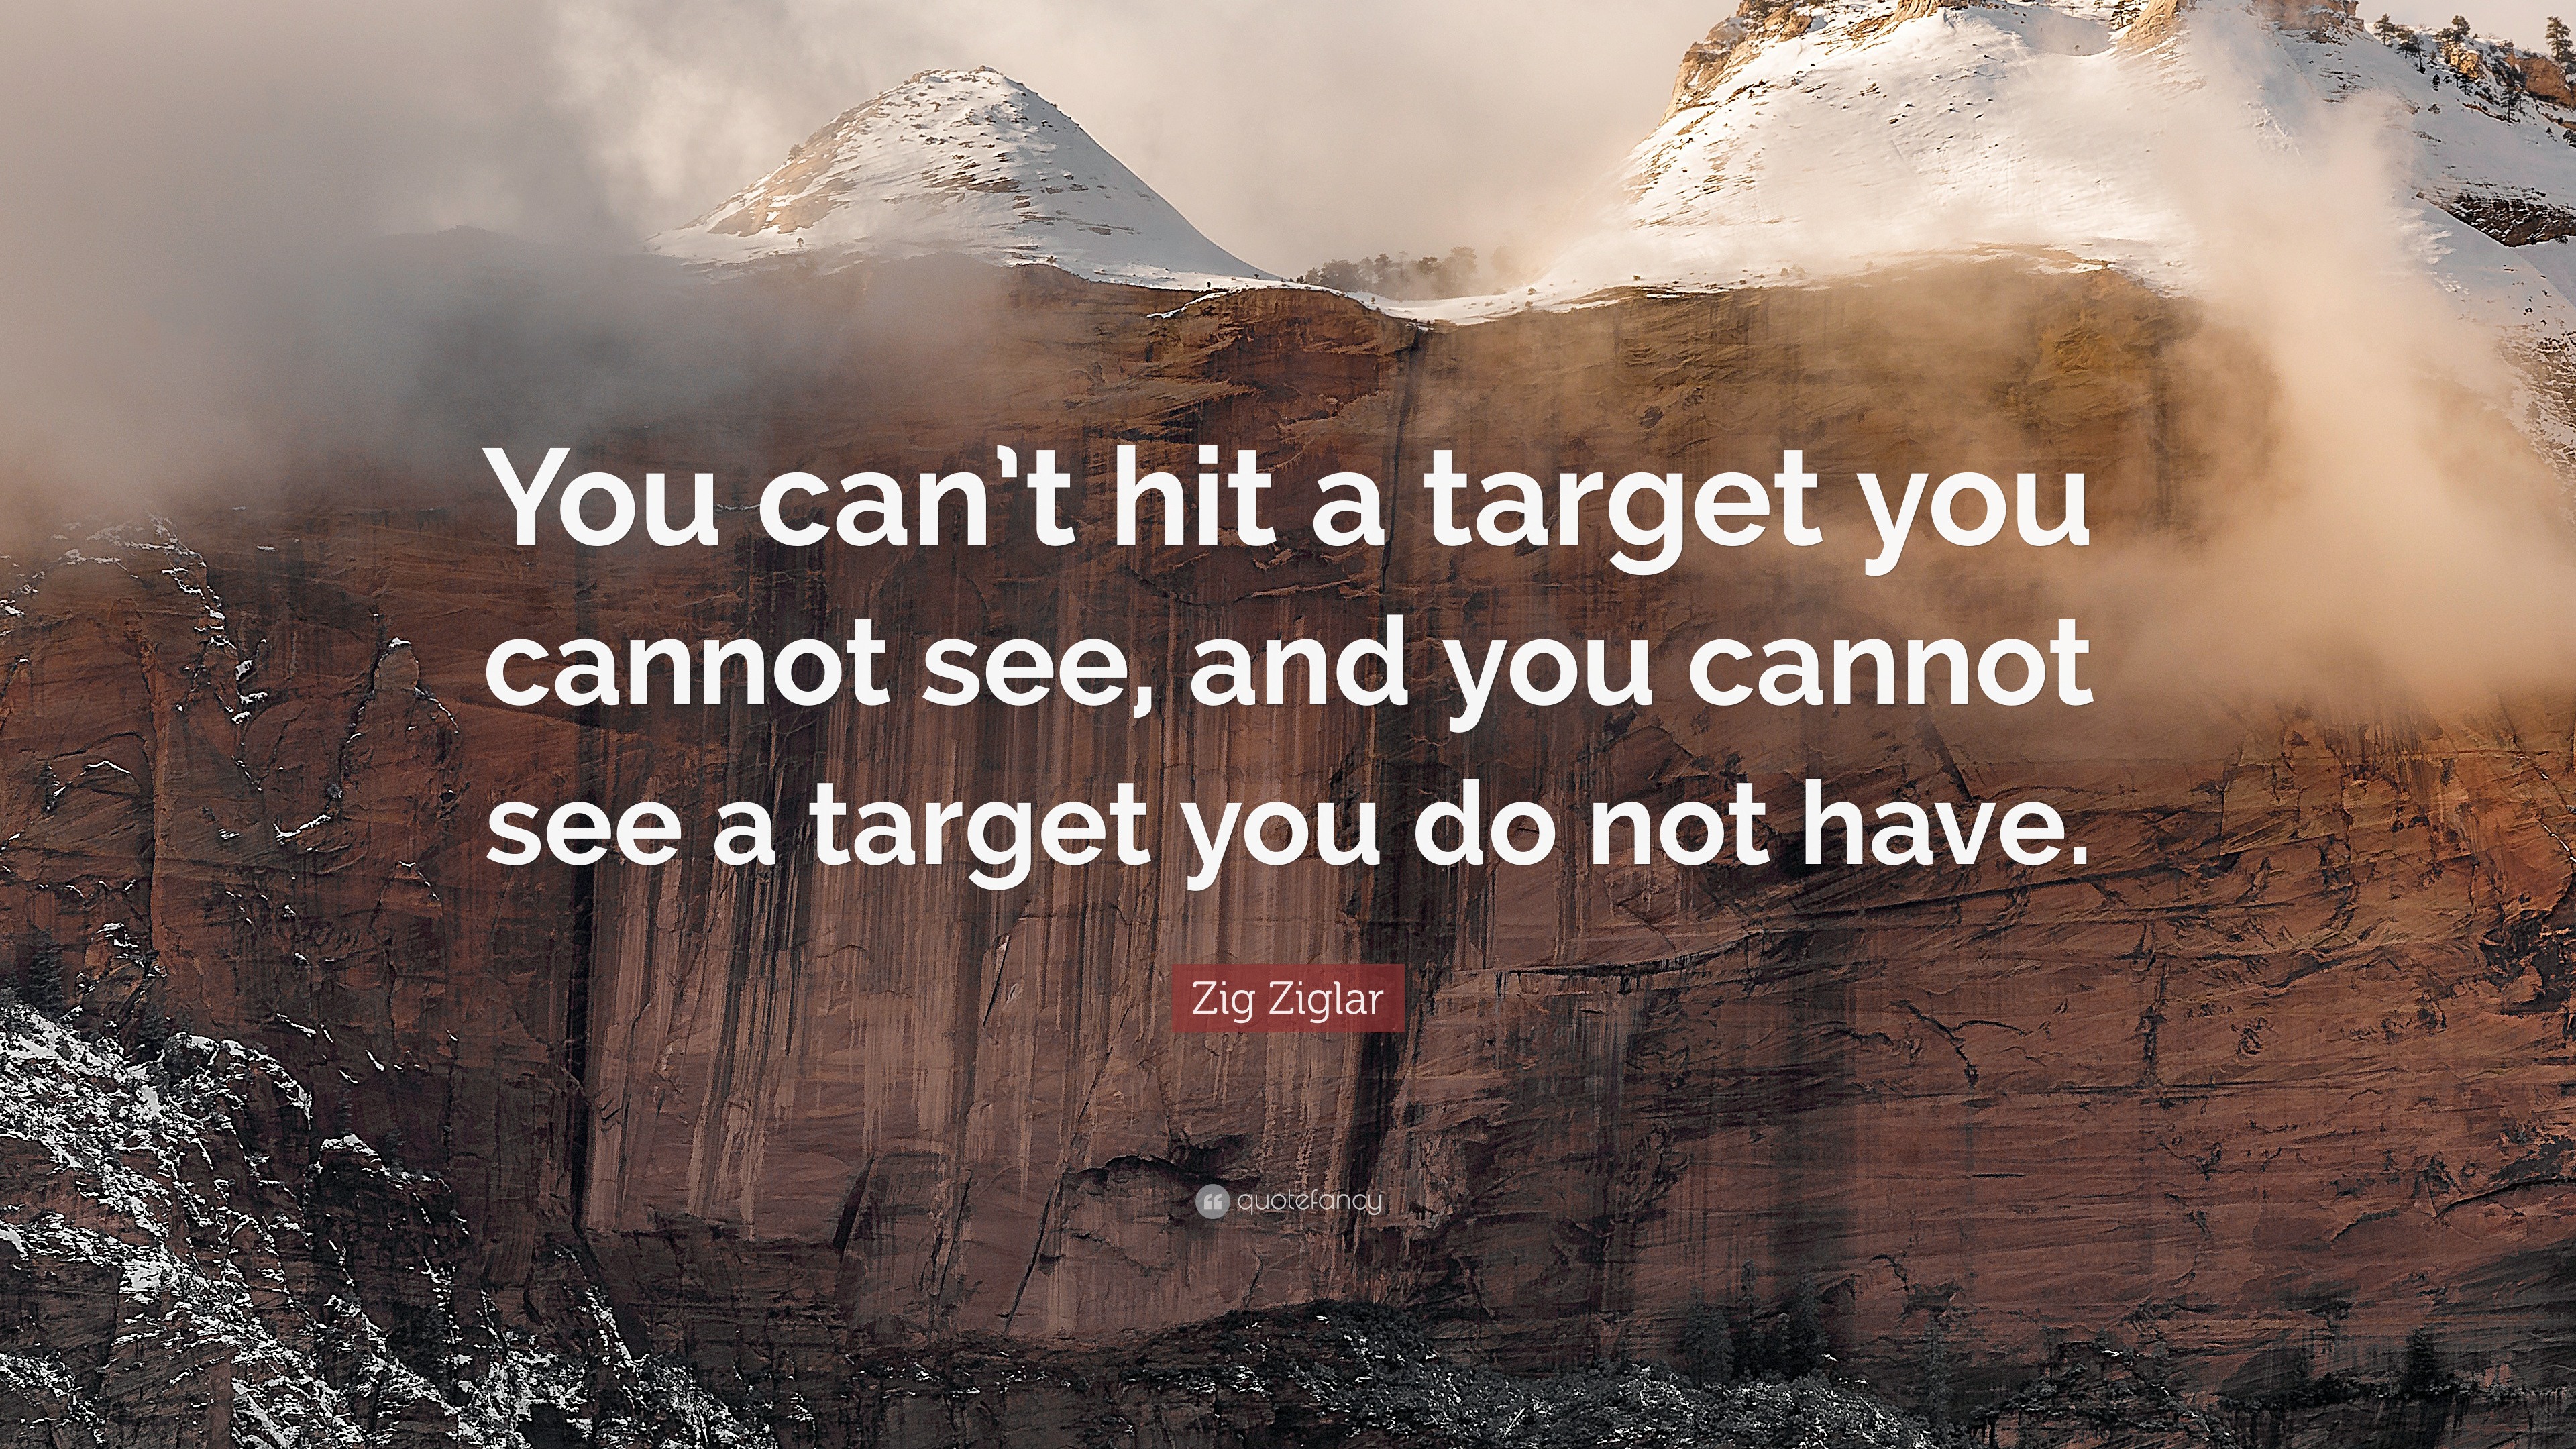 Zig Ziglar Quote “You can’t hit a target you cannot see, and you